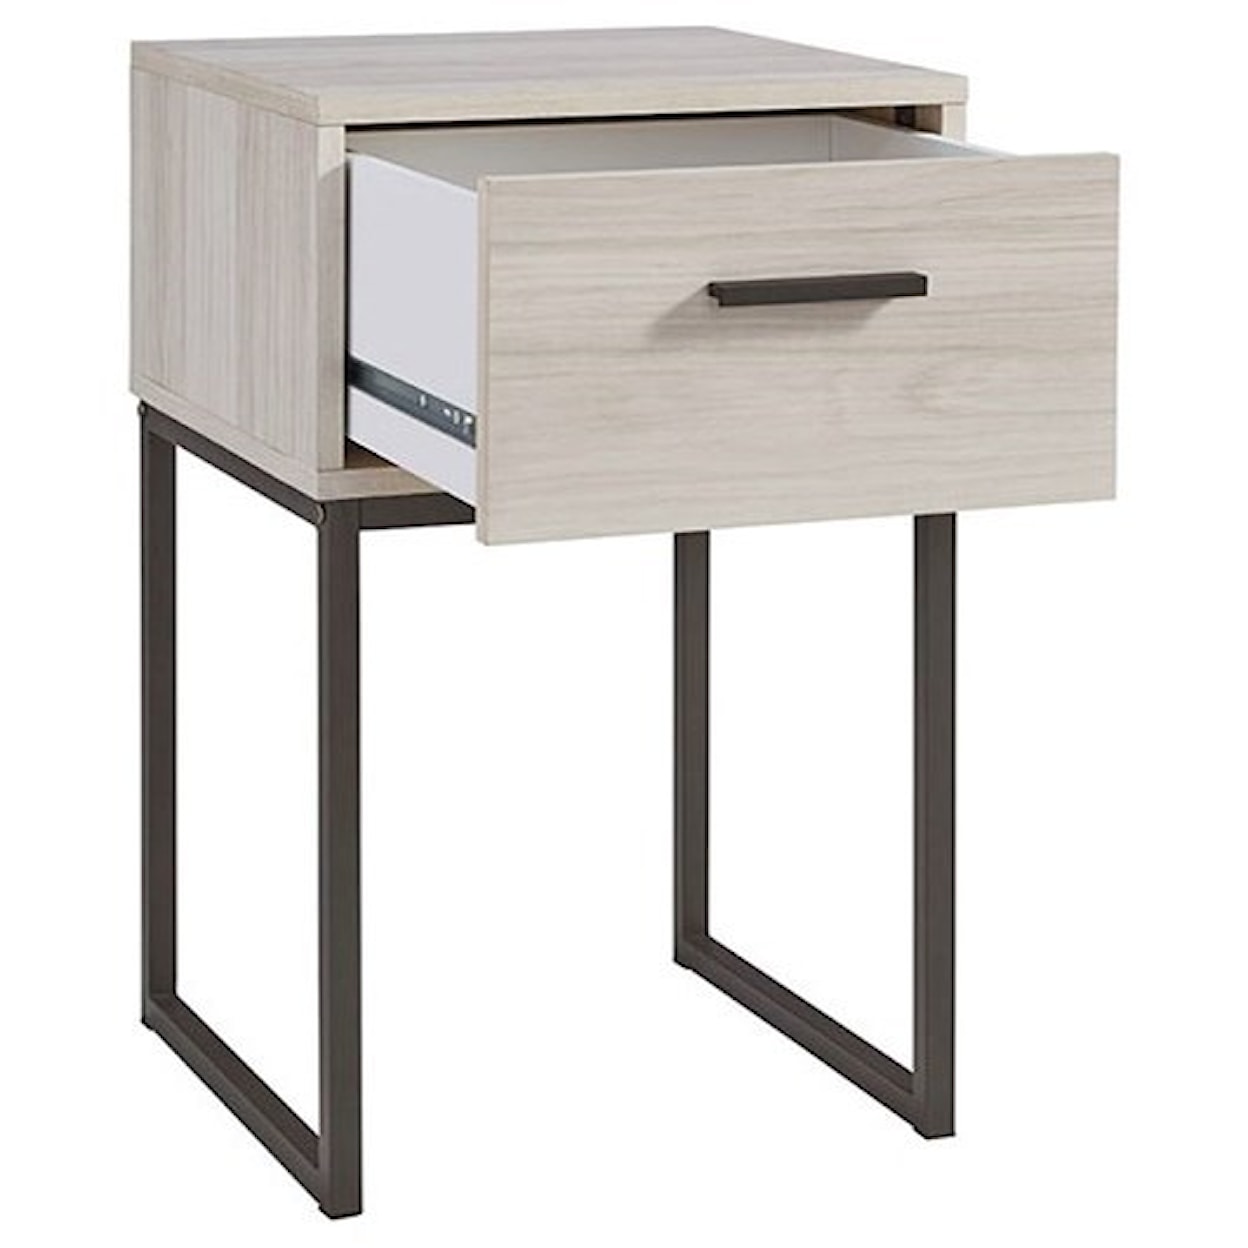 Signature Design by Ashley Socalle Nightstand